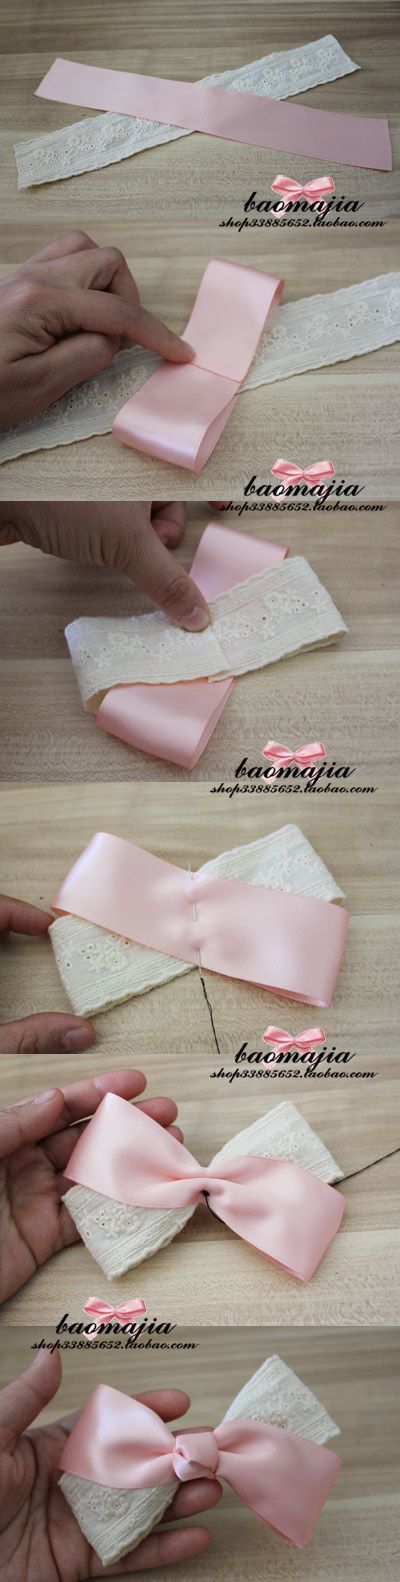 How to make a bow…for a childs hair barrette, etc. the writing is in a differe